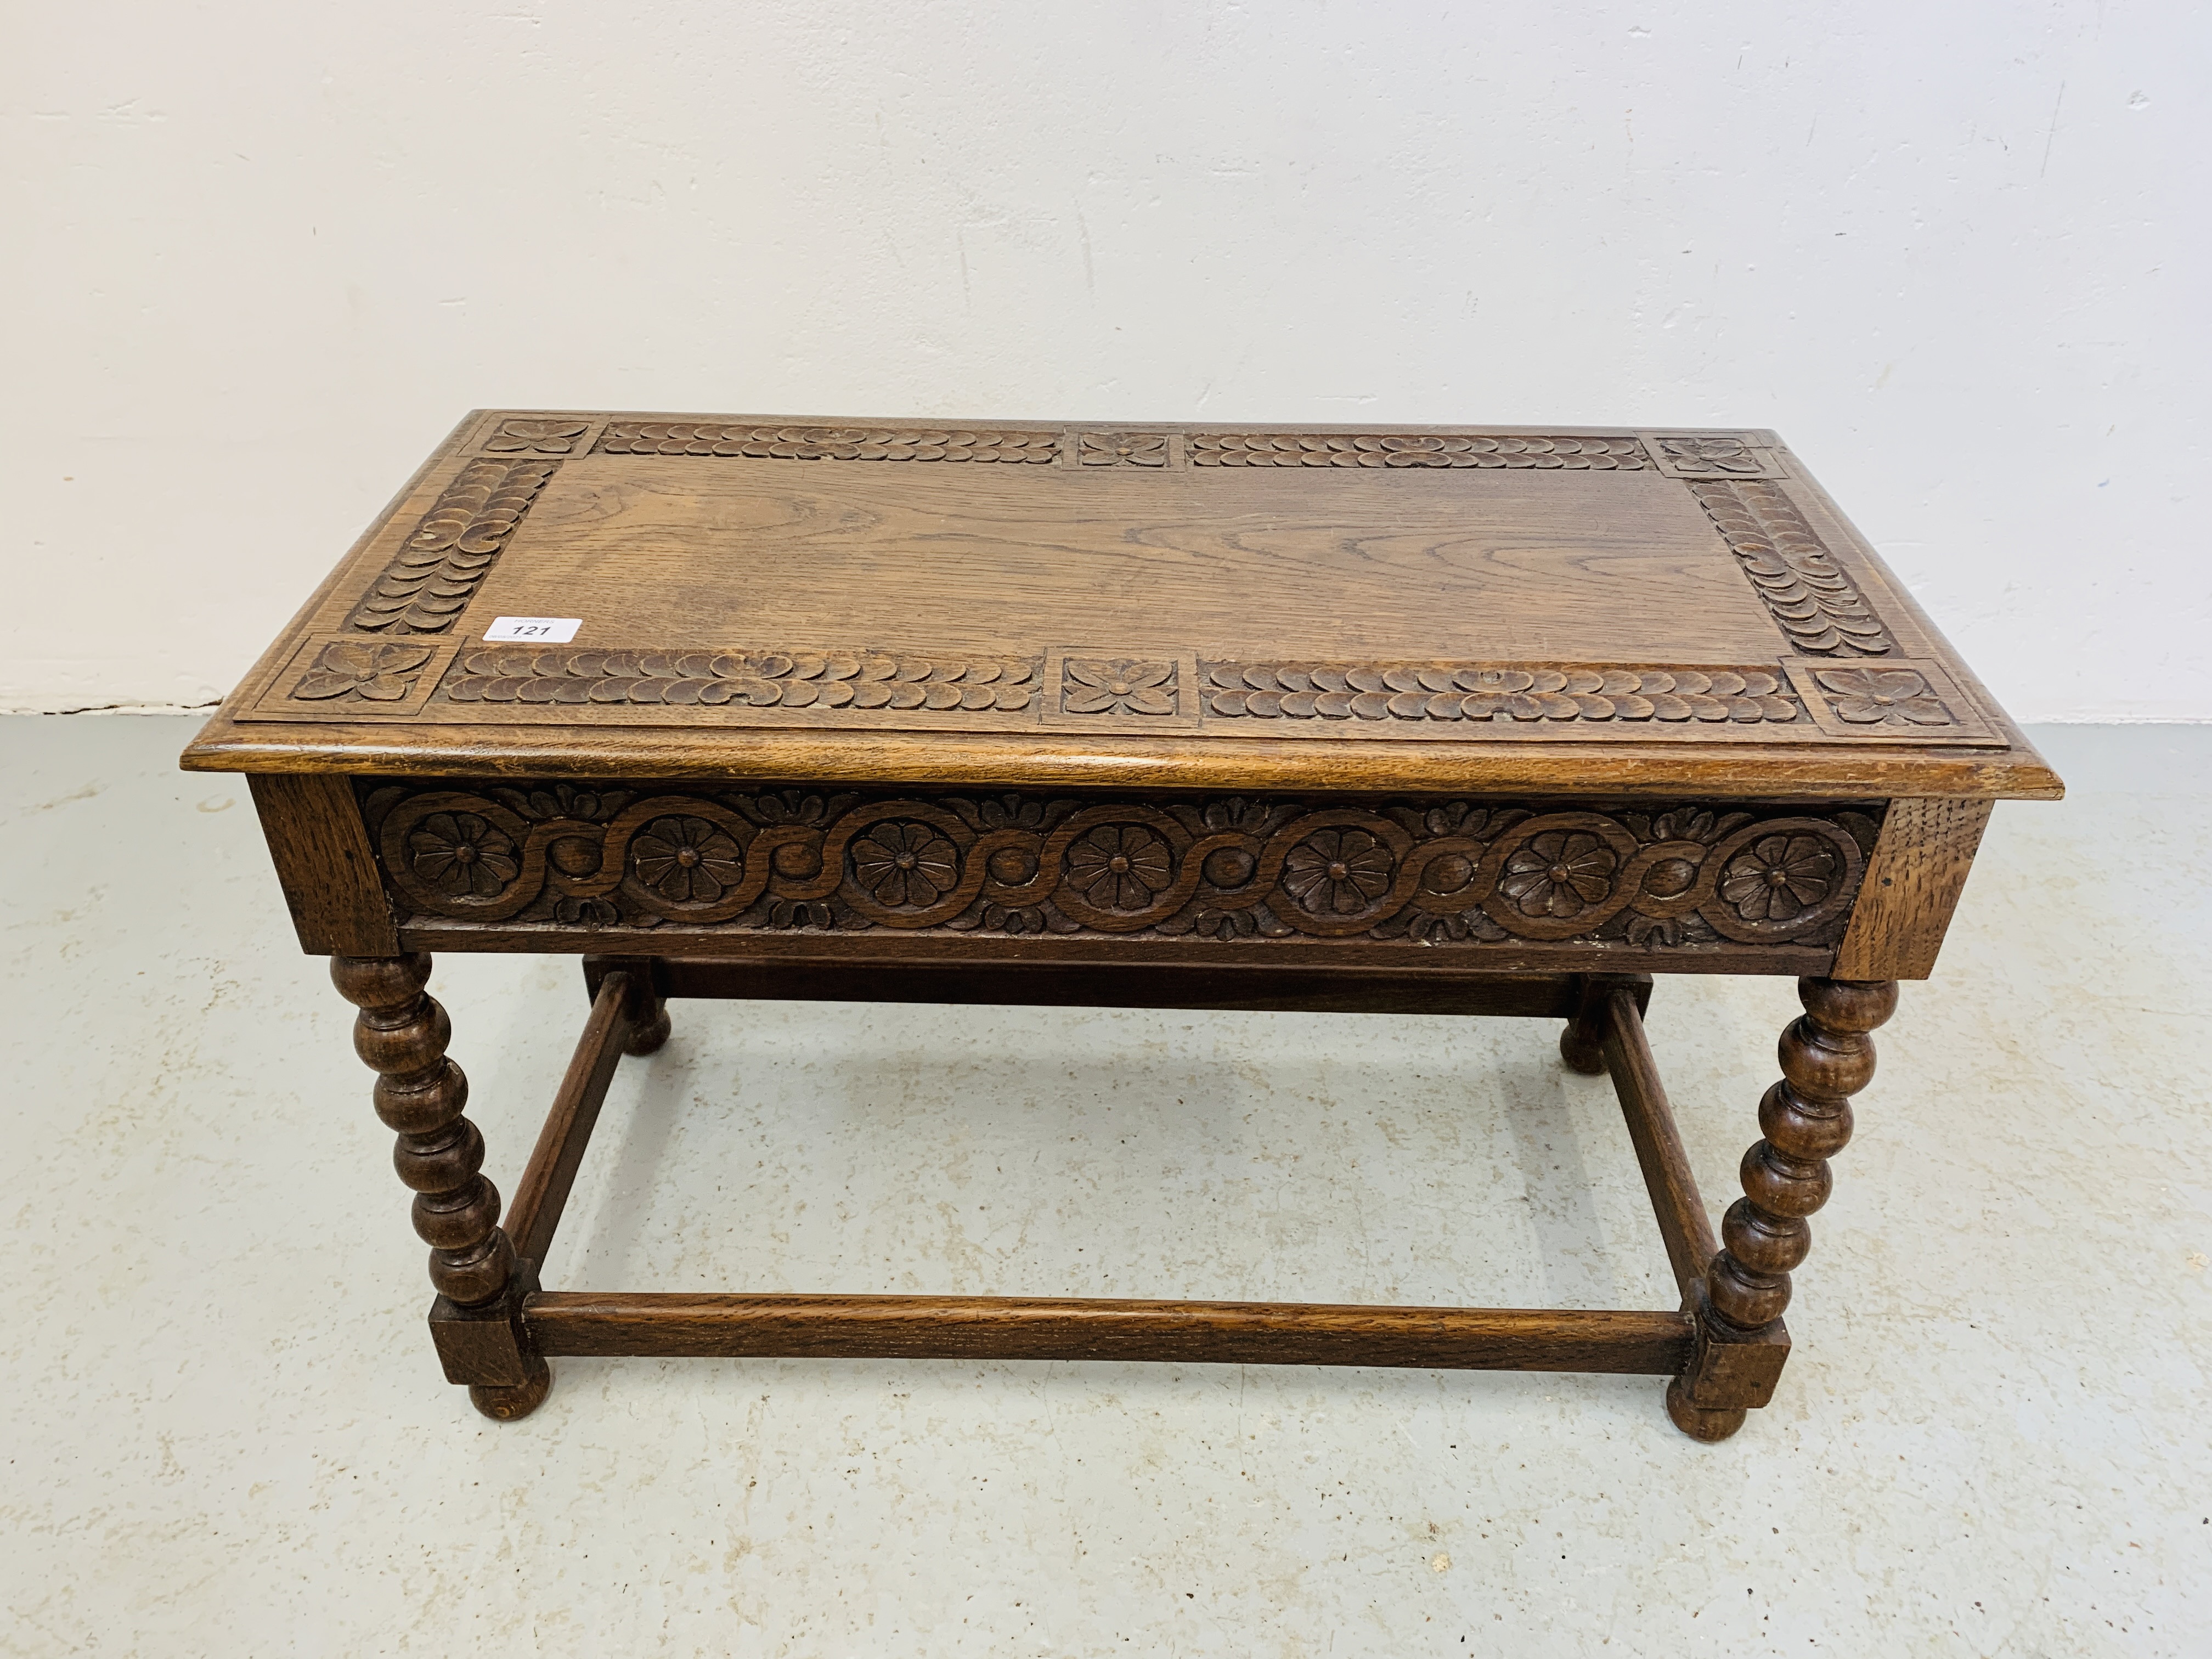 A HAND CARVED OAK SIDE TABLE WITH HINGED TOP AND BOBBIN DETAILED SUPPORTS - W 75CM. D 37CM. H 46CM.